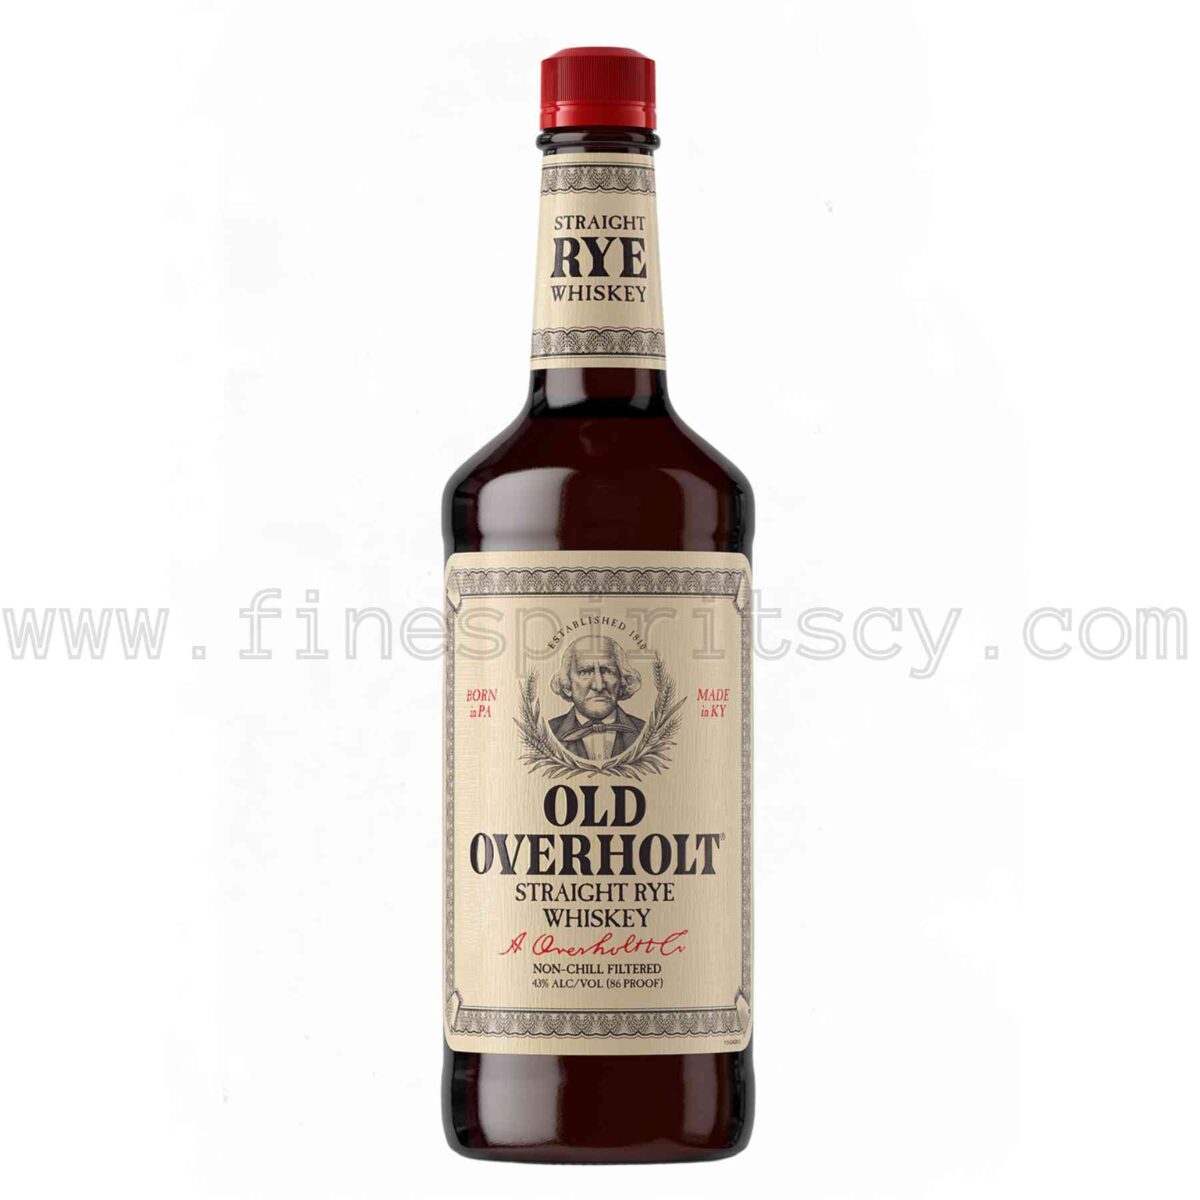 Old Overhold 3 Year Old Straight Rye Whiskey